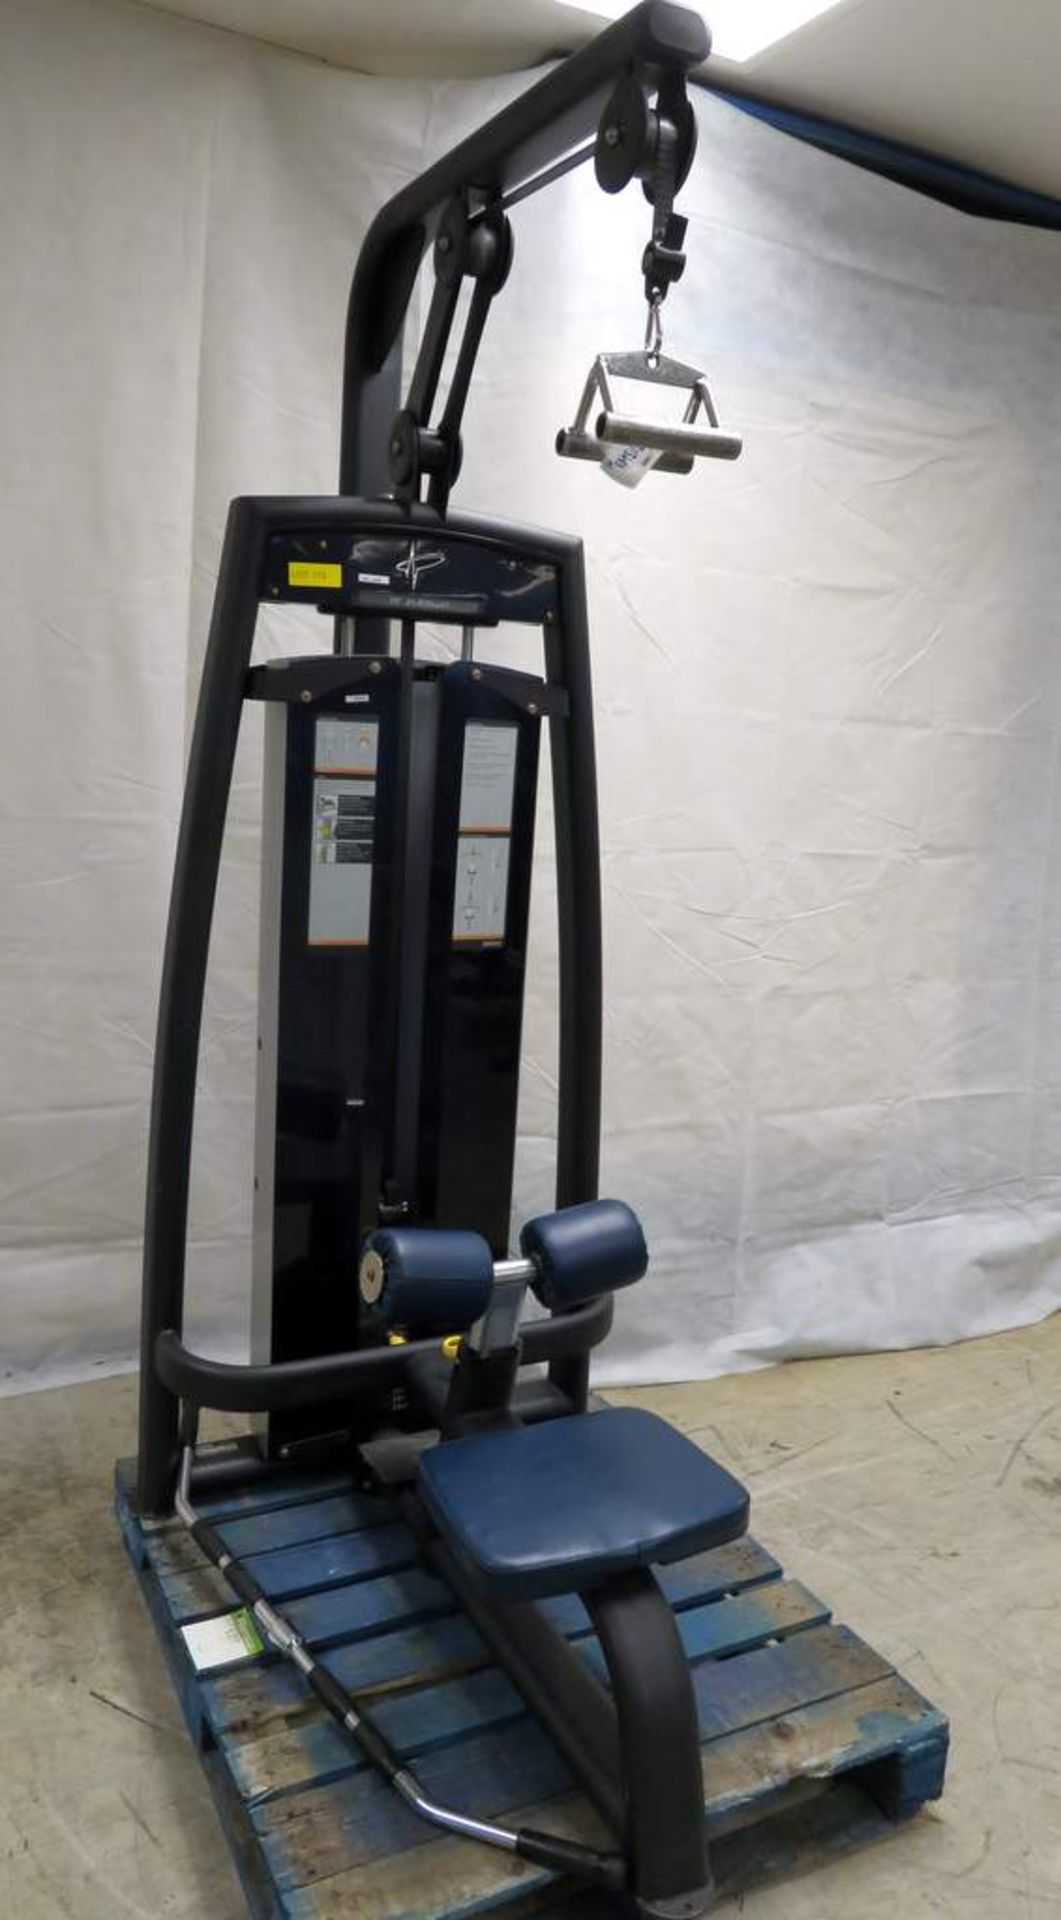 Pulse Fitness - Lat Pulldown - Image 2 of 11